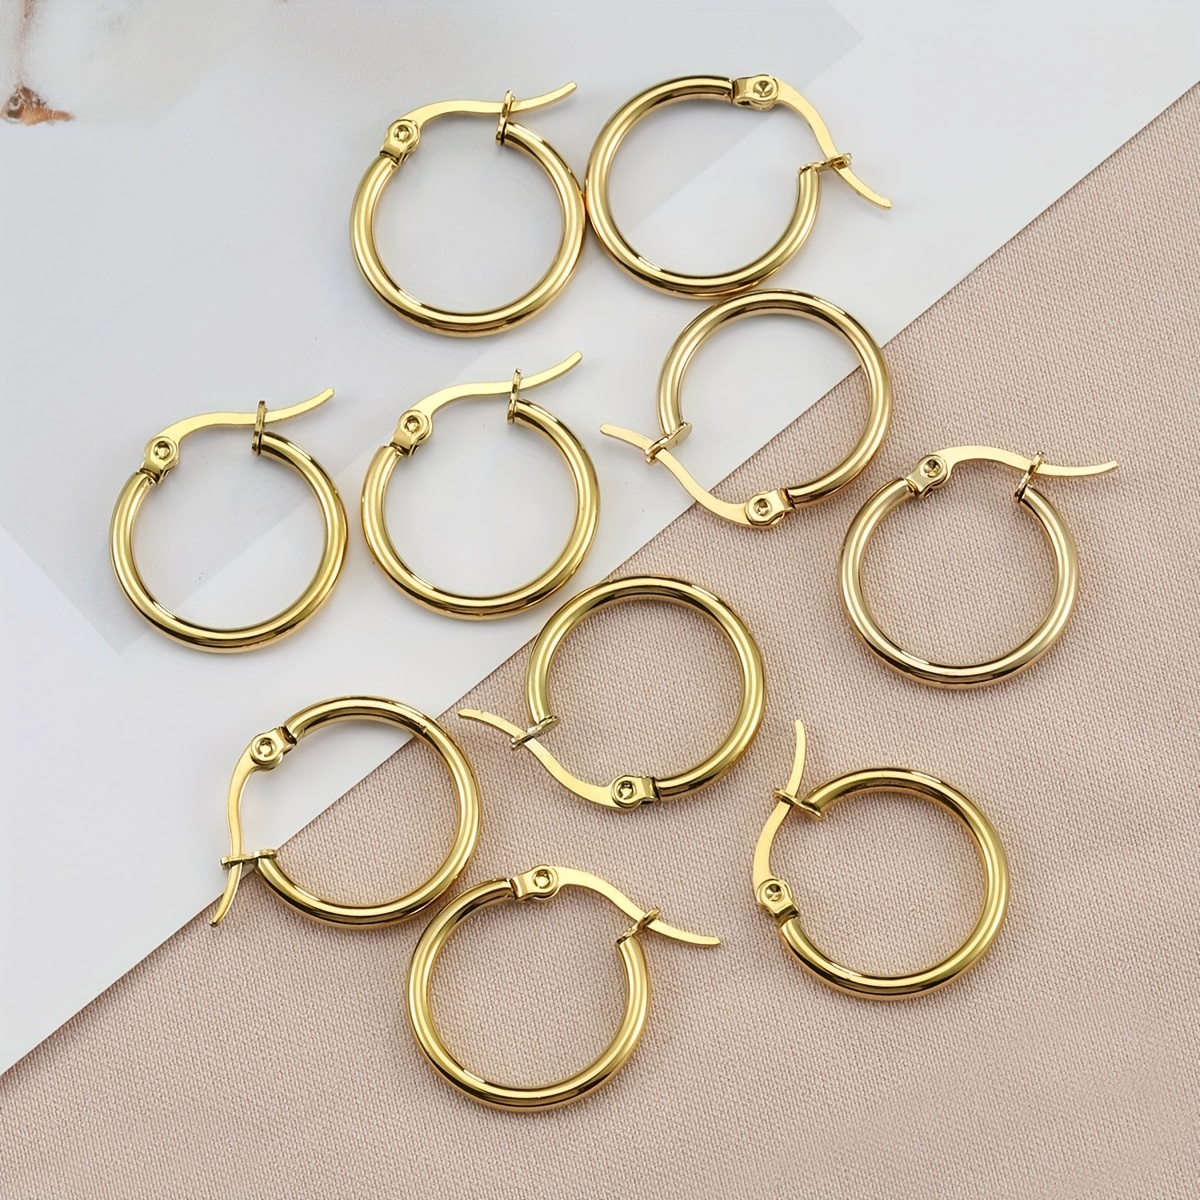 148 Pieces Earring Making Kit, 100pcs Earring Hooks, 16pcs Triangle 16pcs  Teardrops And 16pcs Round Beaded Hoop Earrings Supplies, For Jewelry Making